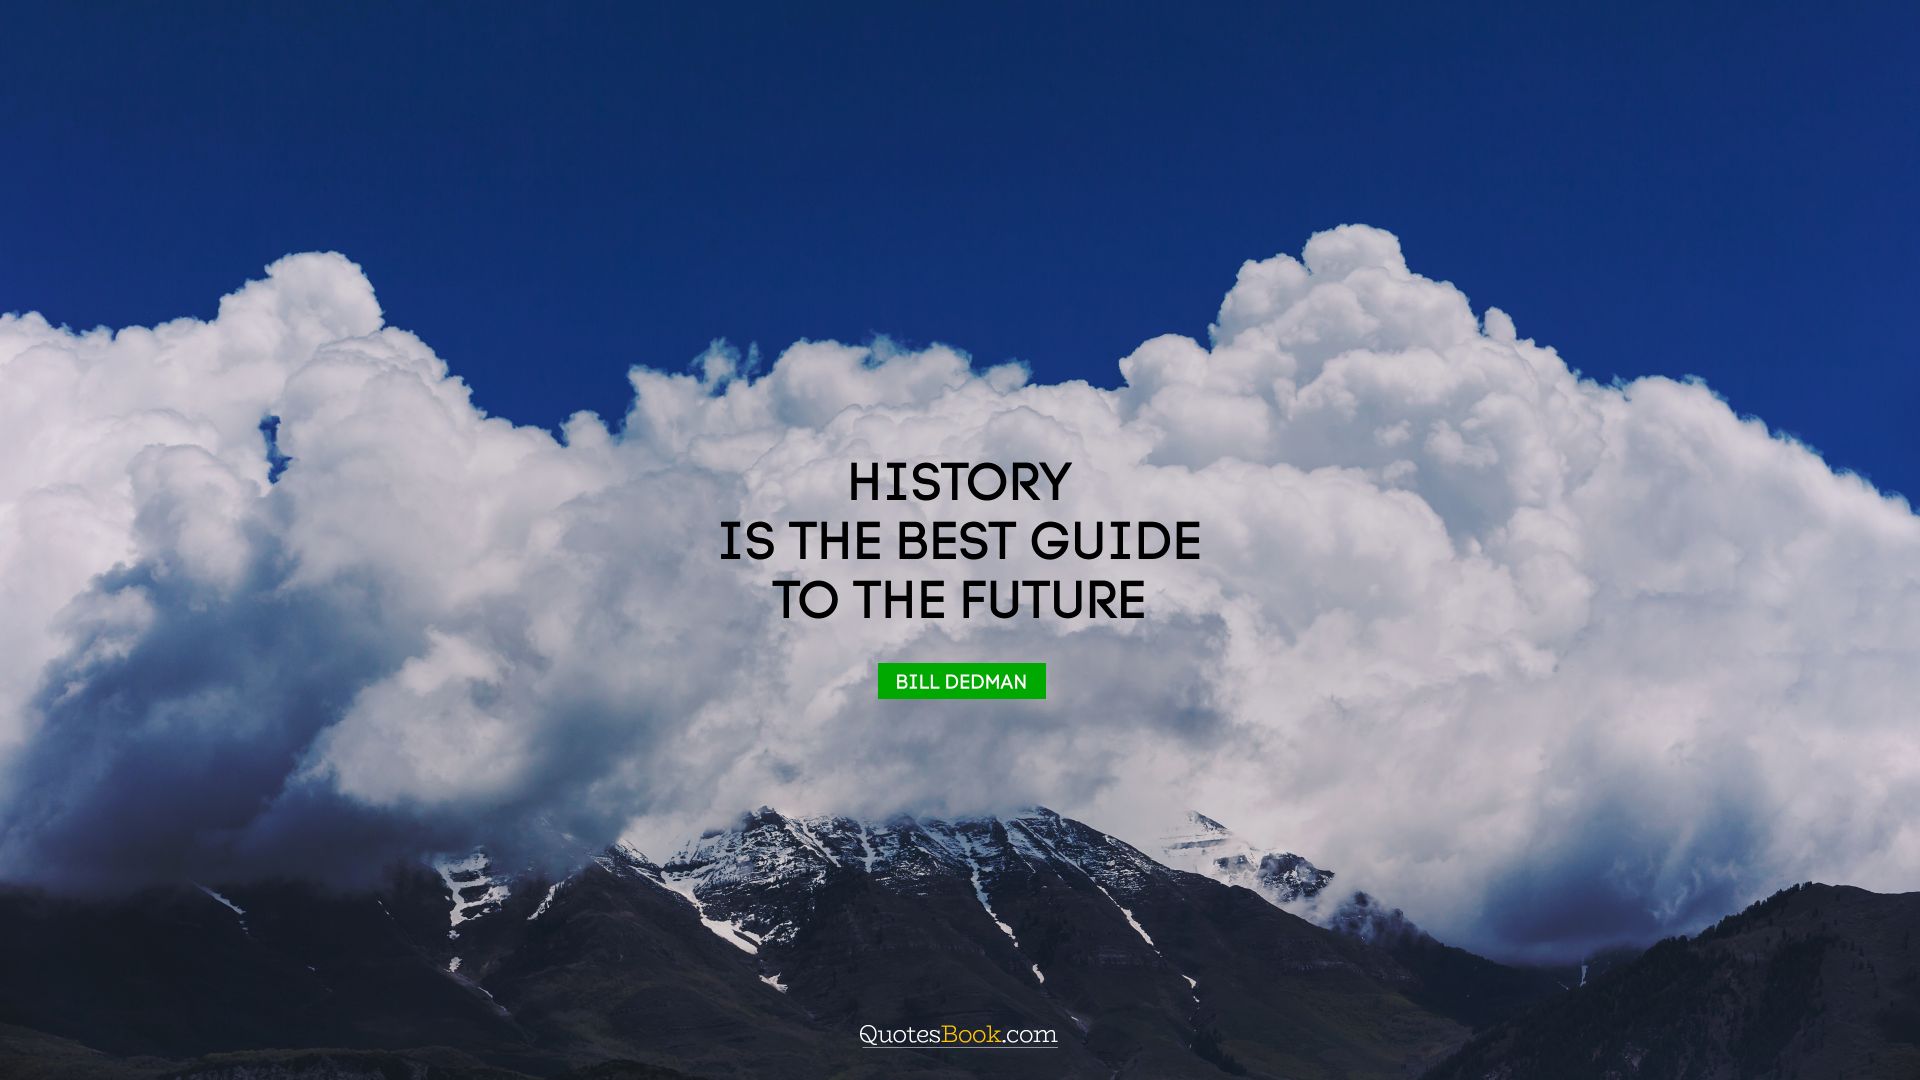 History is the best guide to the future. - Quote by Bill Dedman